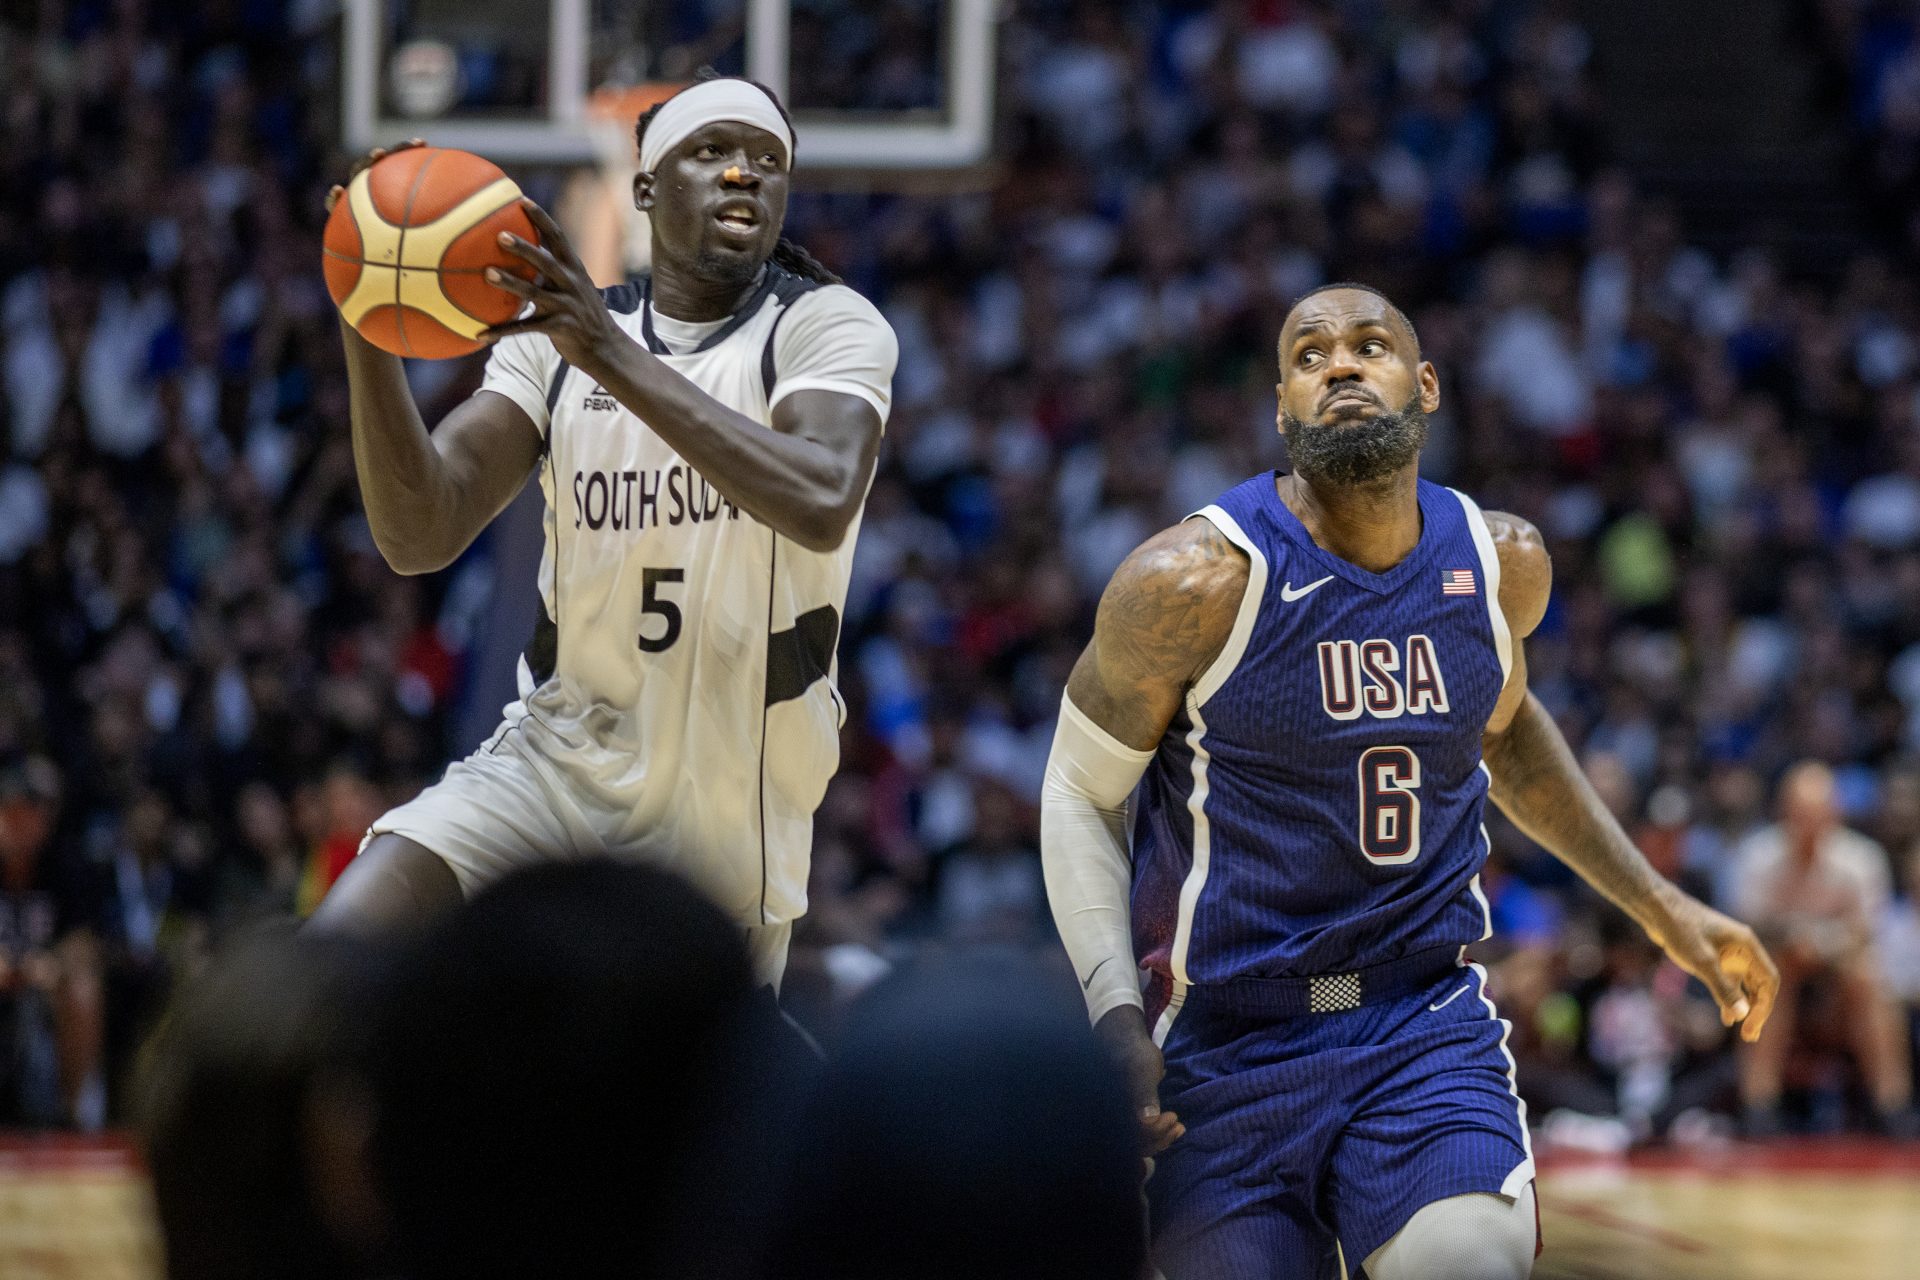 South Sudan continue their inspirational journey against LeBron James and Team USA